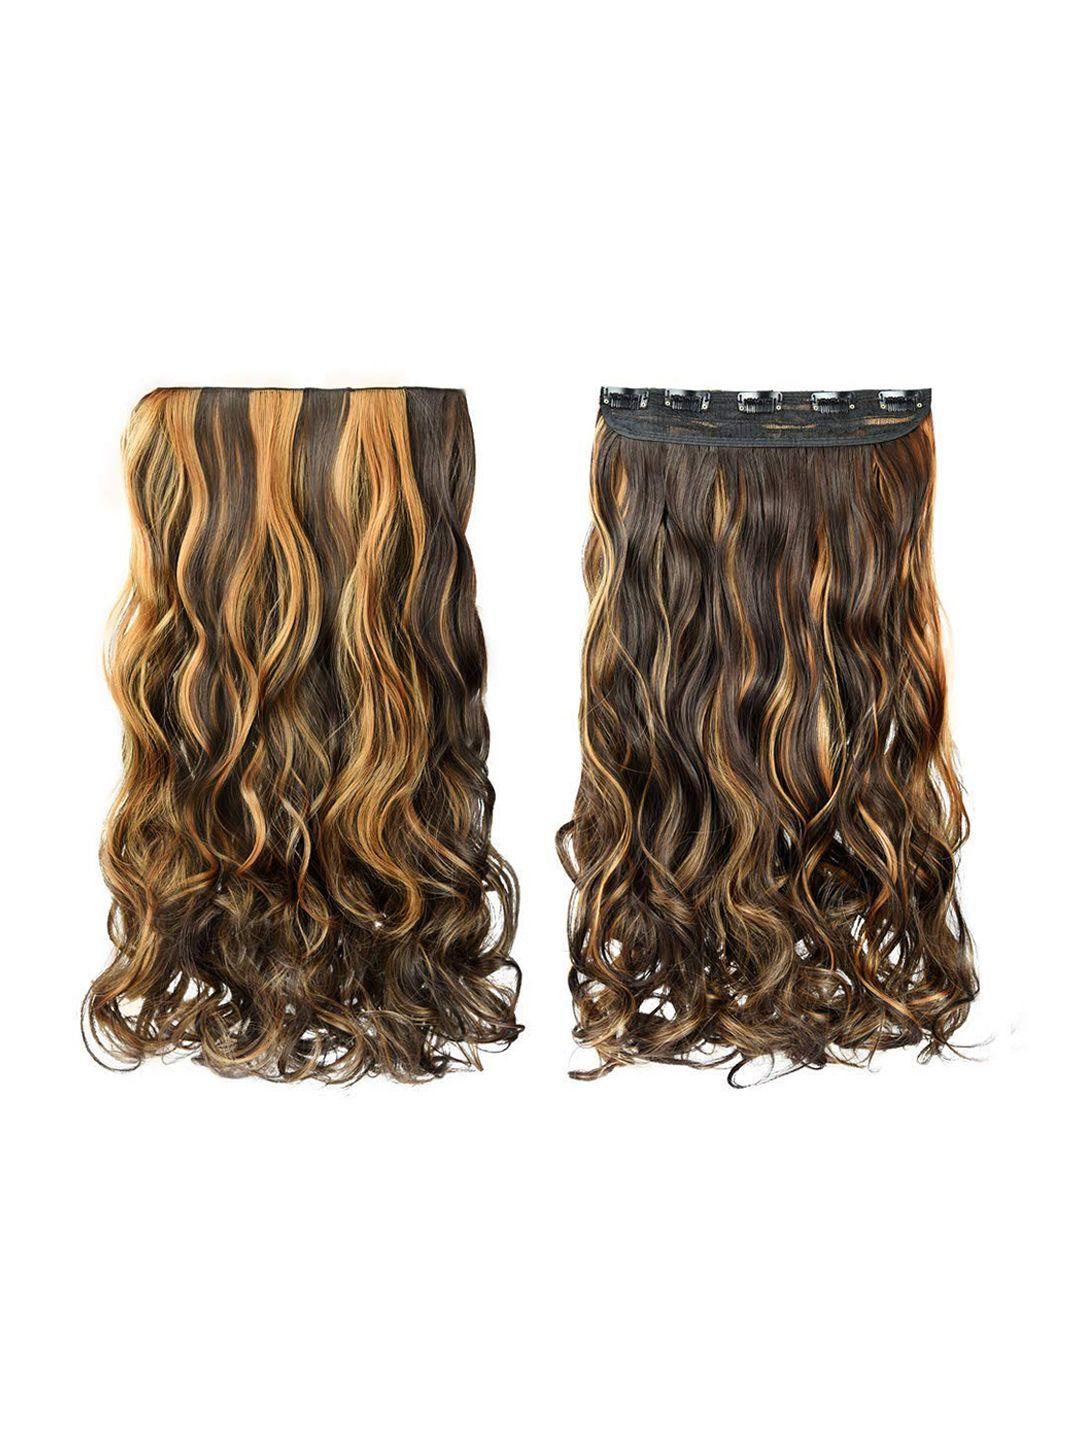 chanderkash brown & gold-toned 5 clip lightweight curly & wavy hair extension